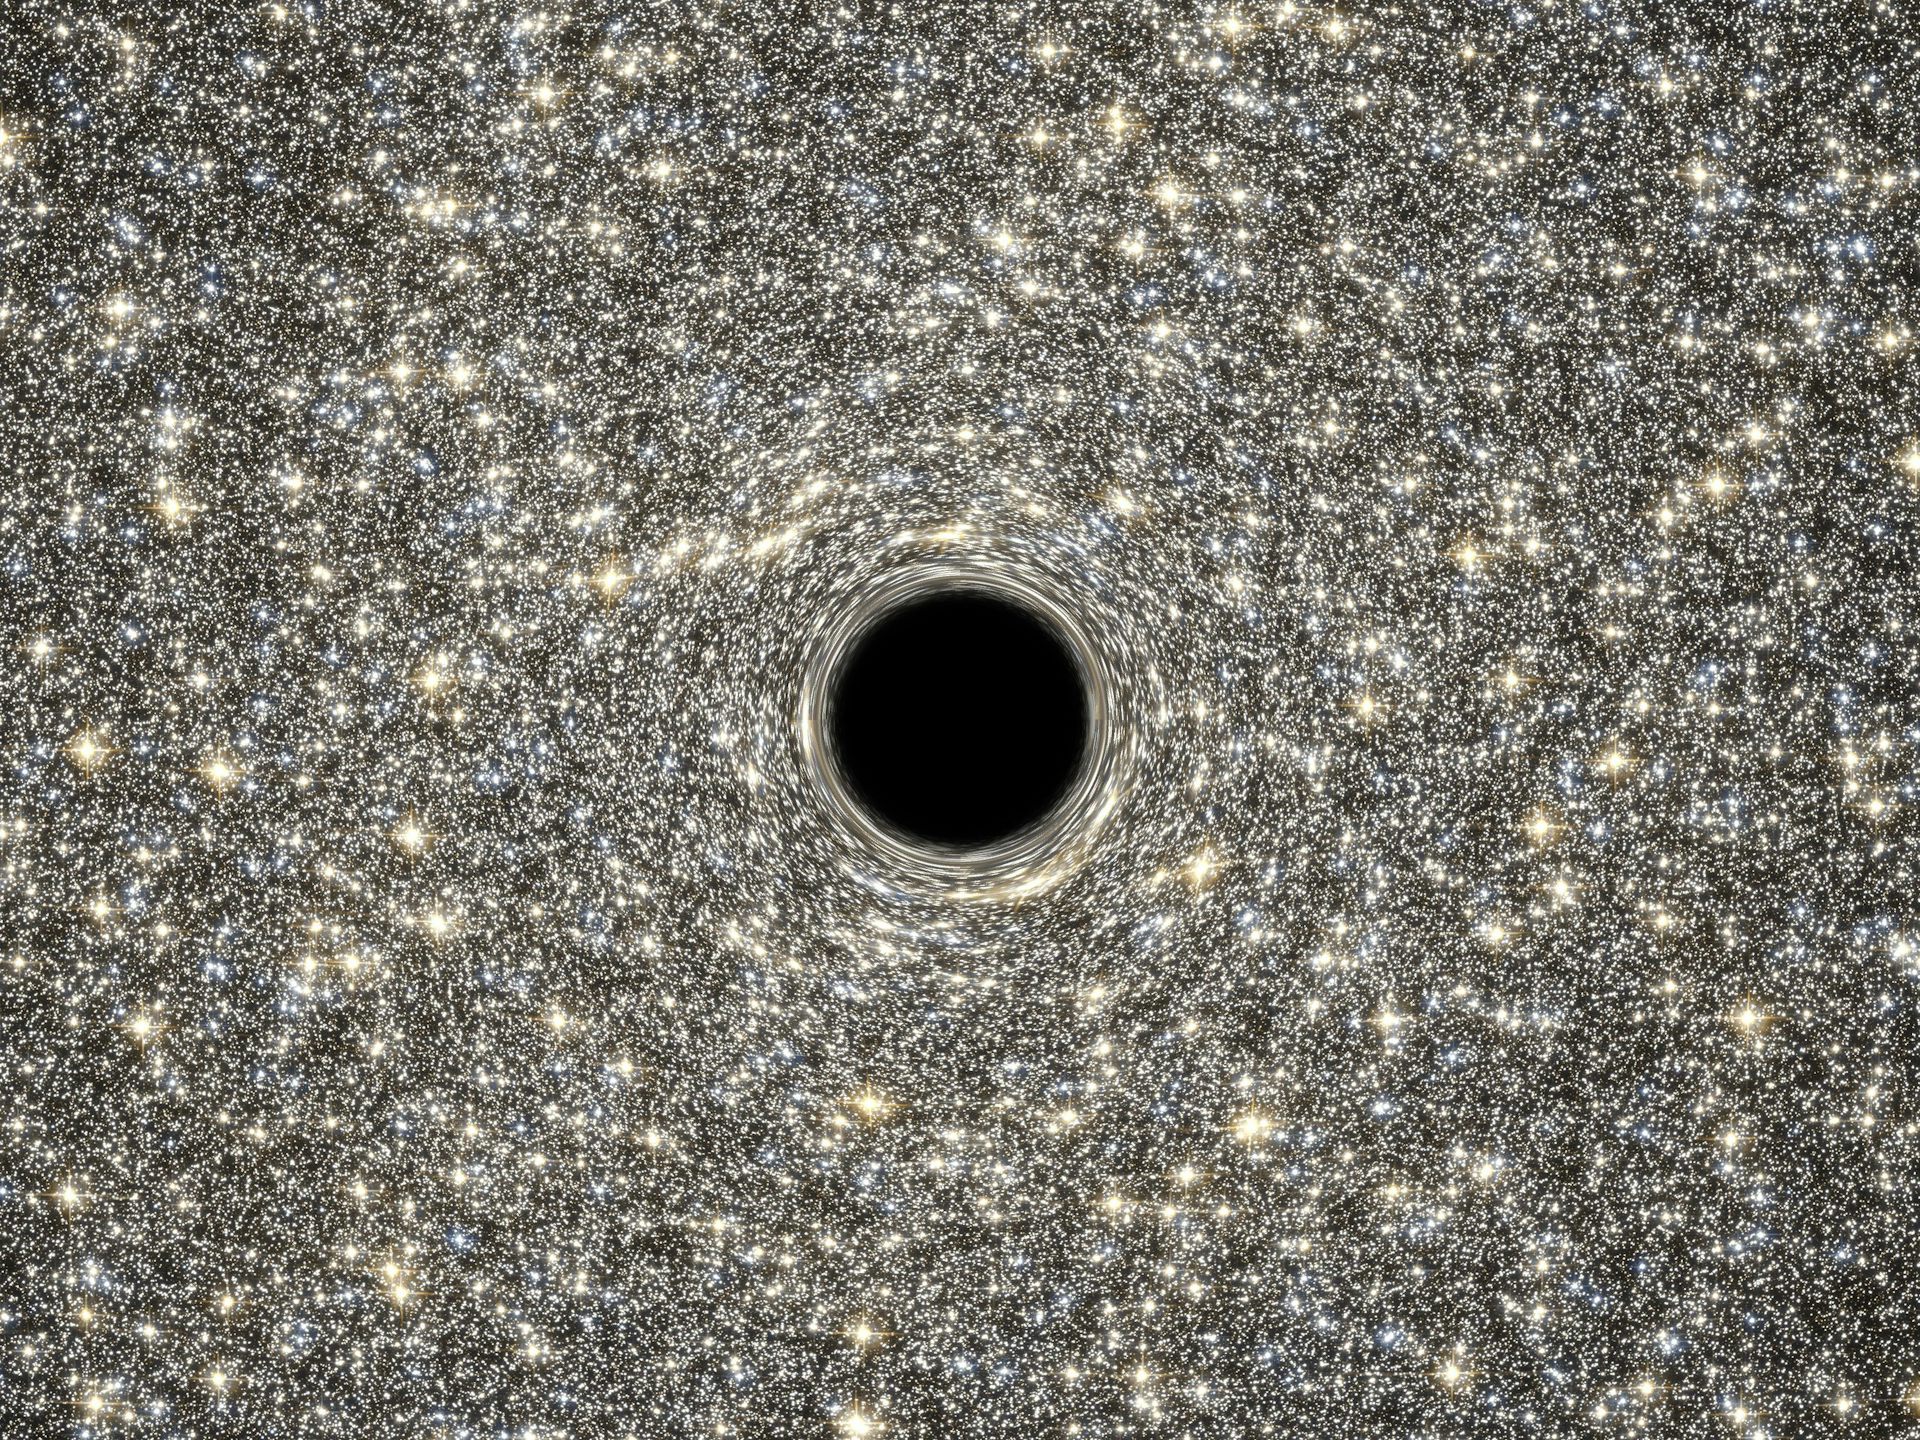 could you catch up to someone falling into a black hole